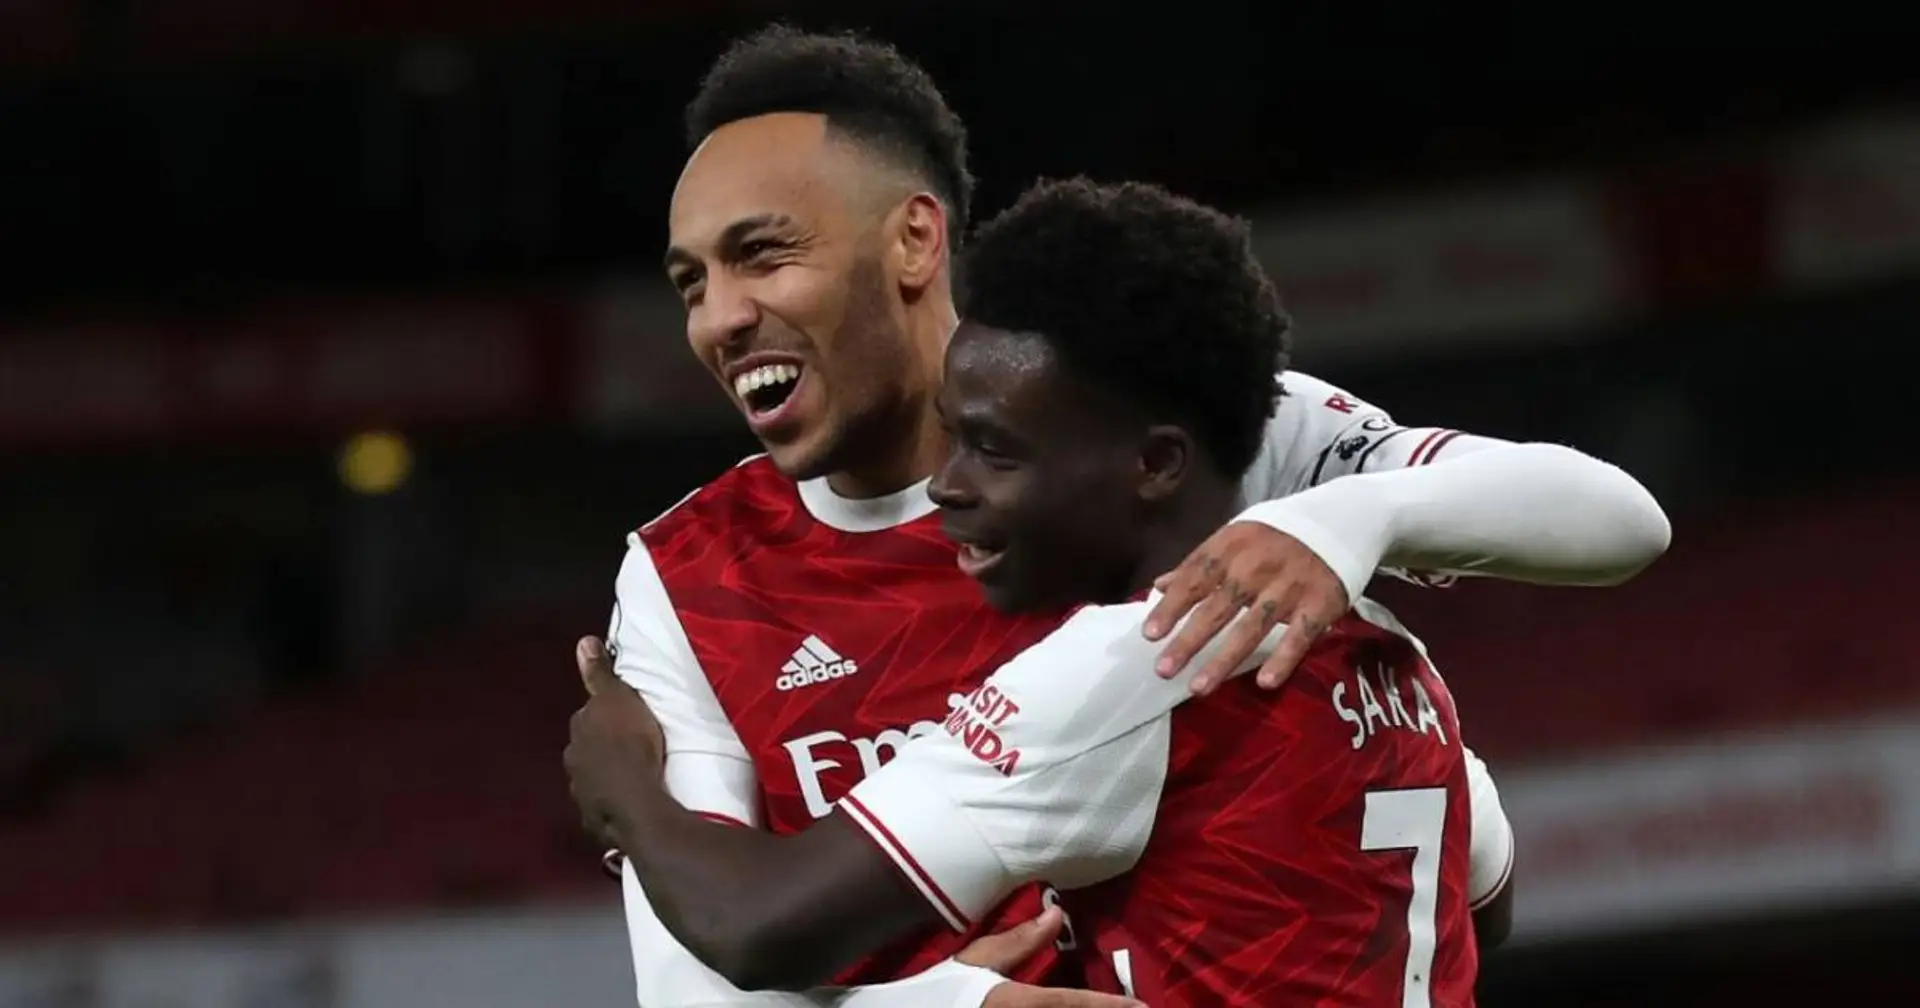 Auba gets his mojo back, Smith Rowe shines again and 3 more takeaways from Newcastle thumping